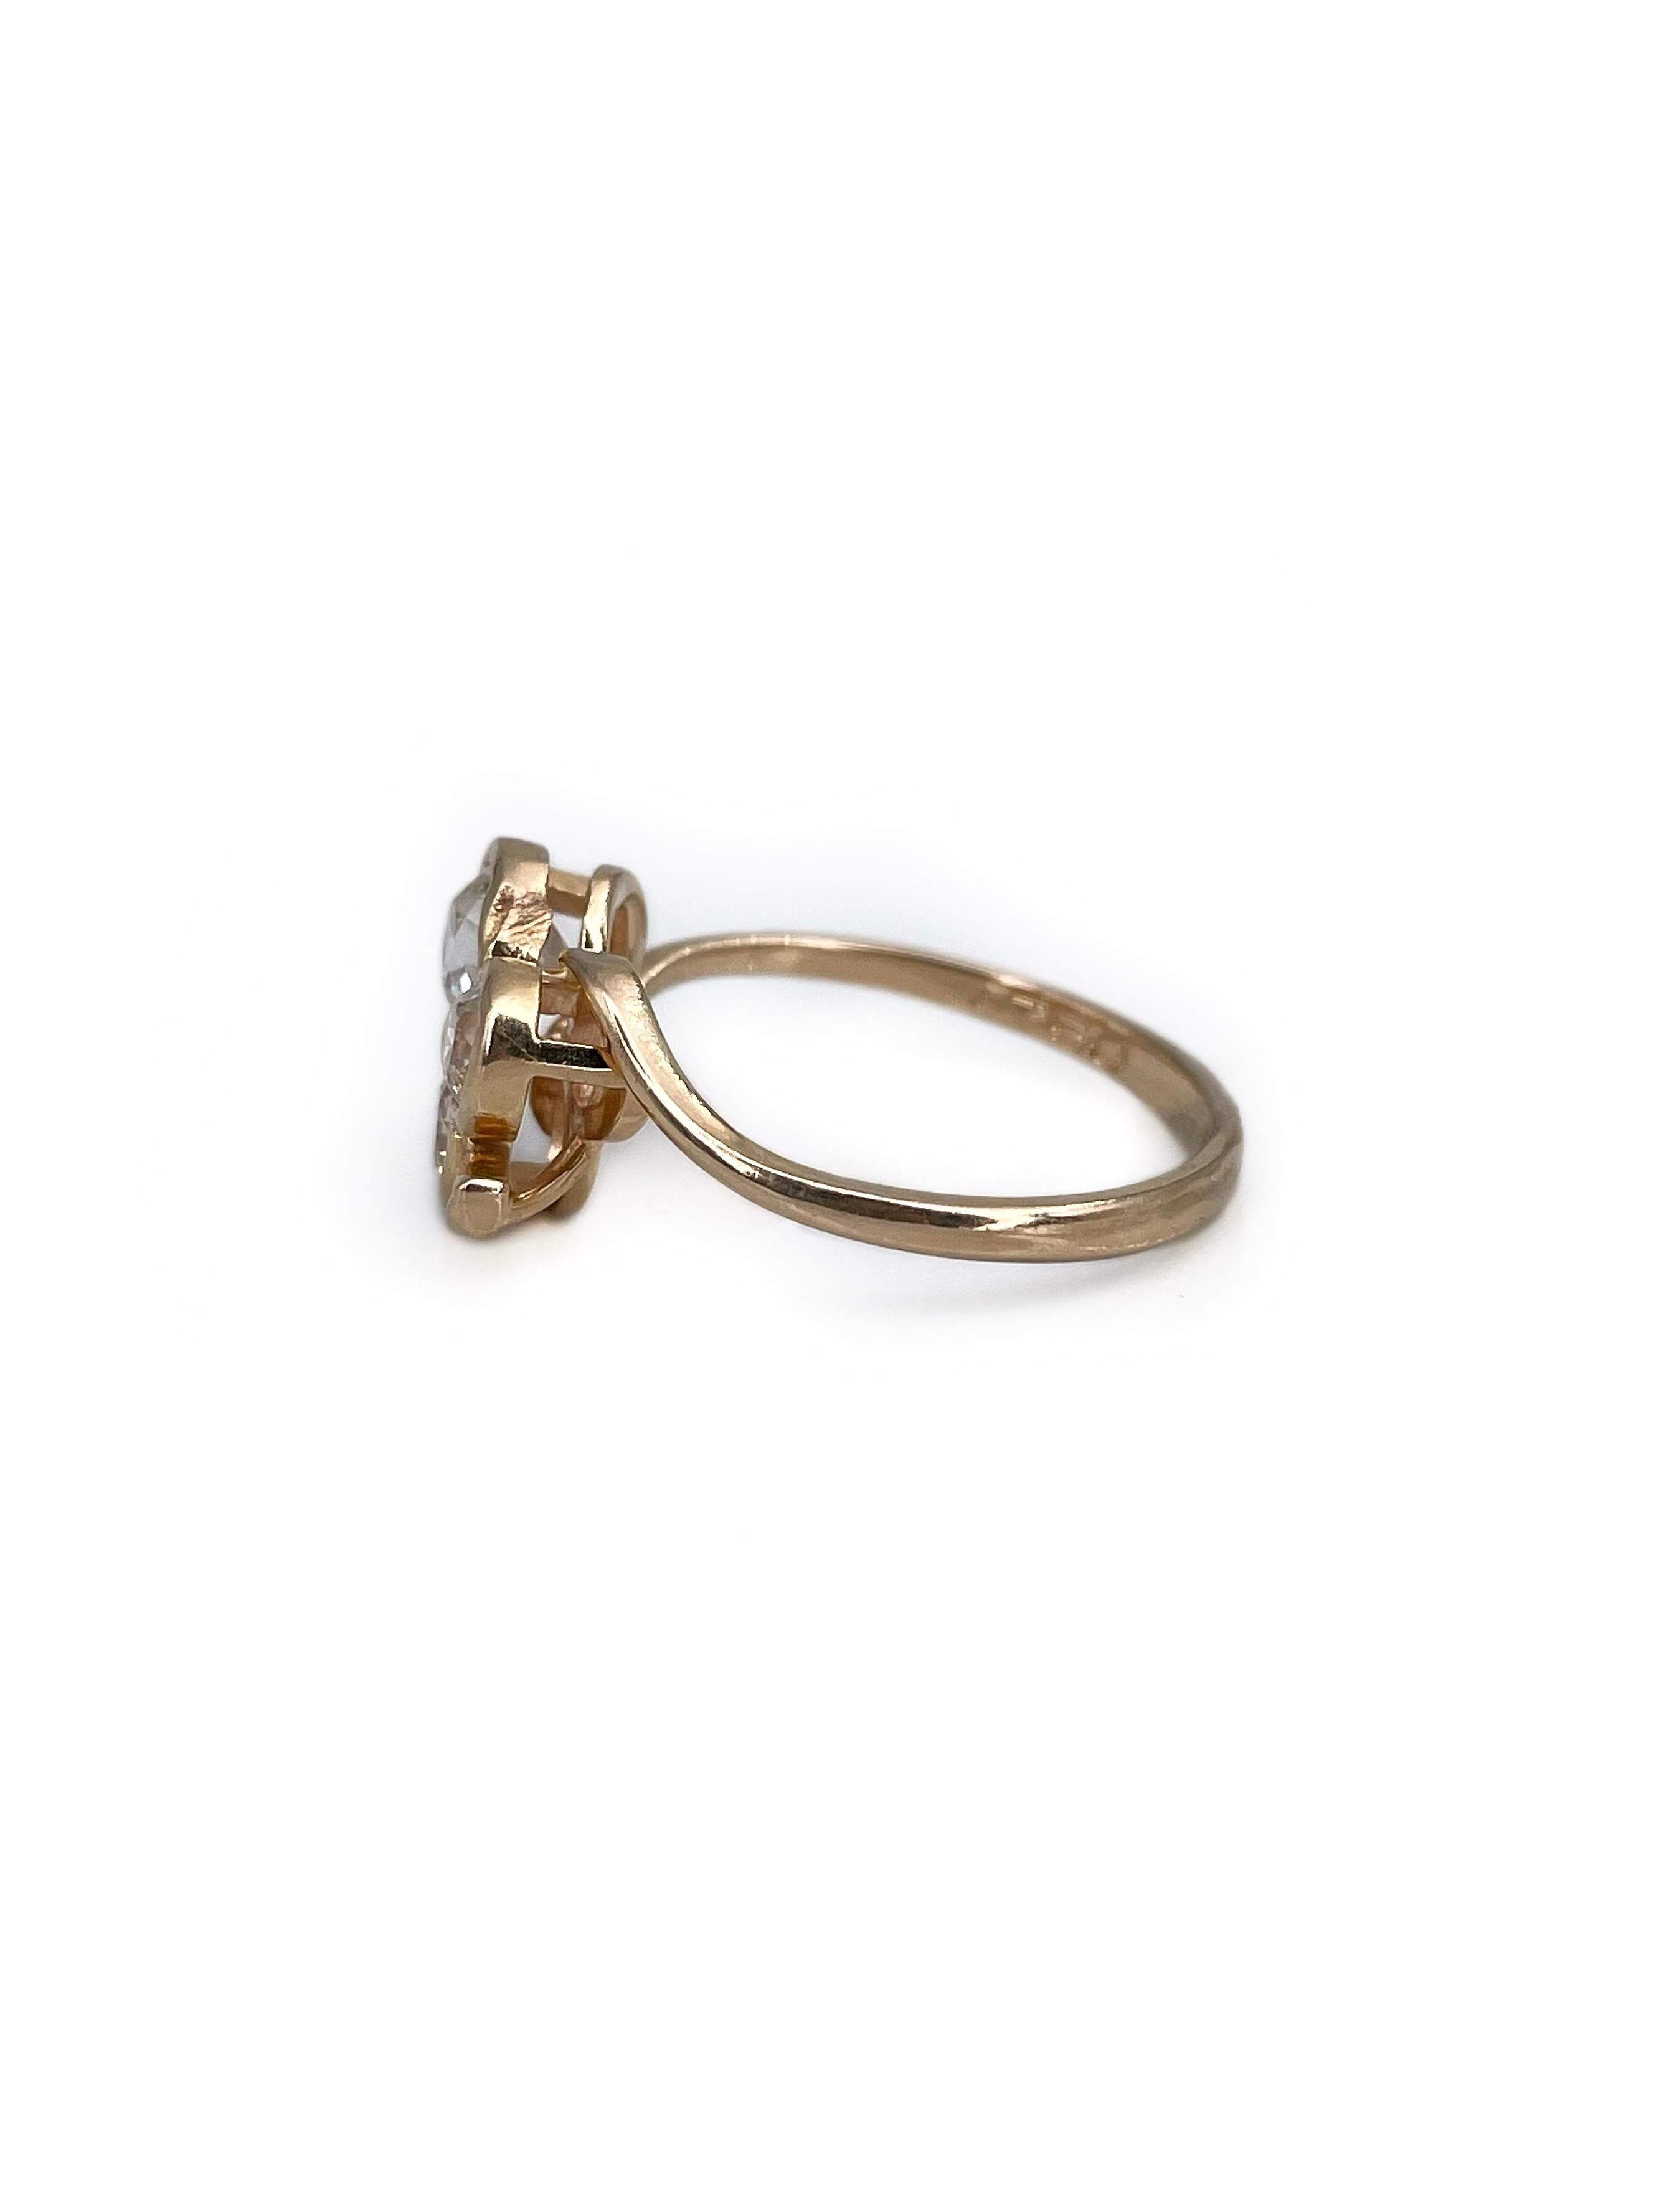 This is an antique Edwardian three leaf clover ring crafted in 18K gold. The piece features 3 old European cut diamonds: TW 0.84ct, W-STW, VS-SI2. 

Weight: 2.55g
Size: 16.5 (US 6)

IMPORTANT: please ask about the possibility to resize before